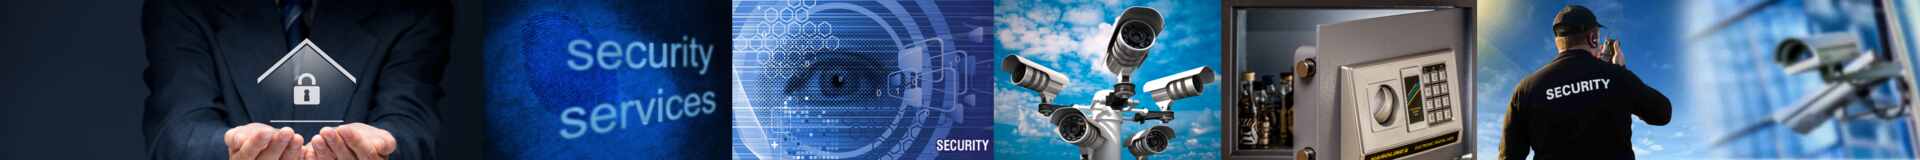 Global Security Services bids and RFP from Austria